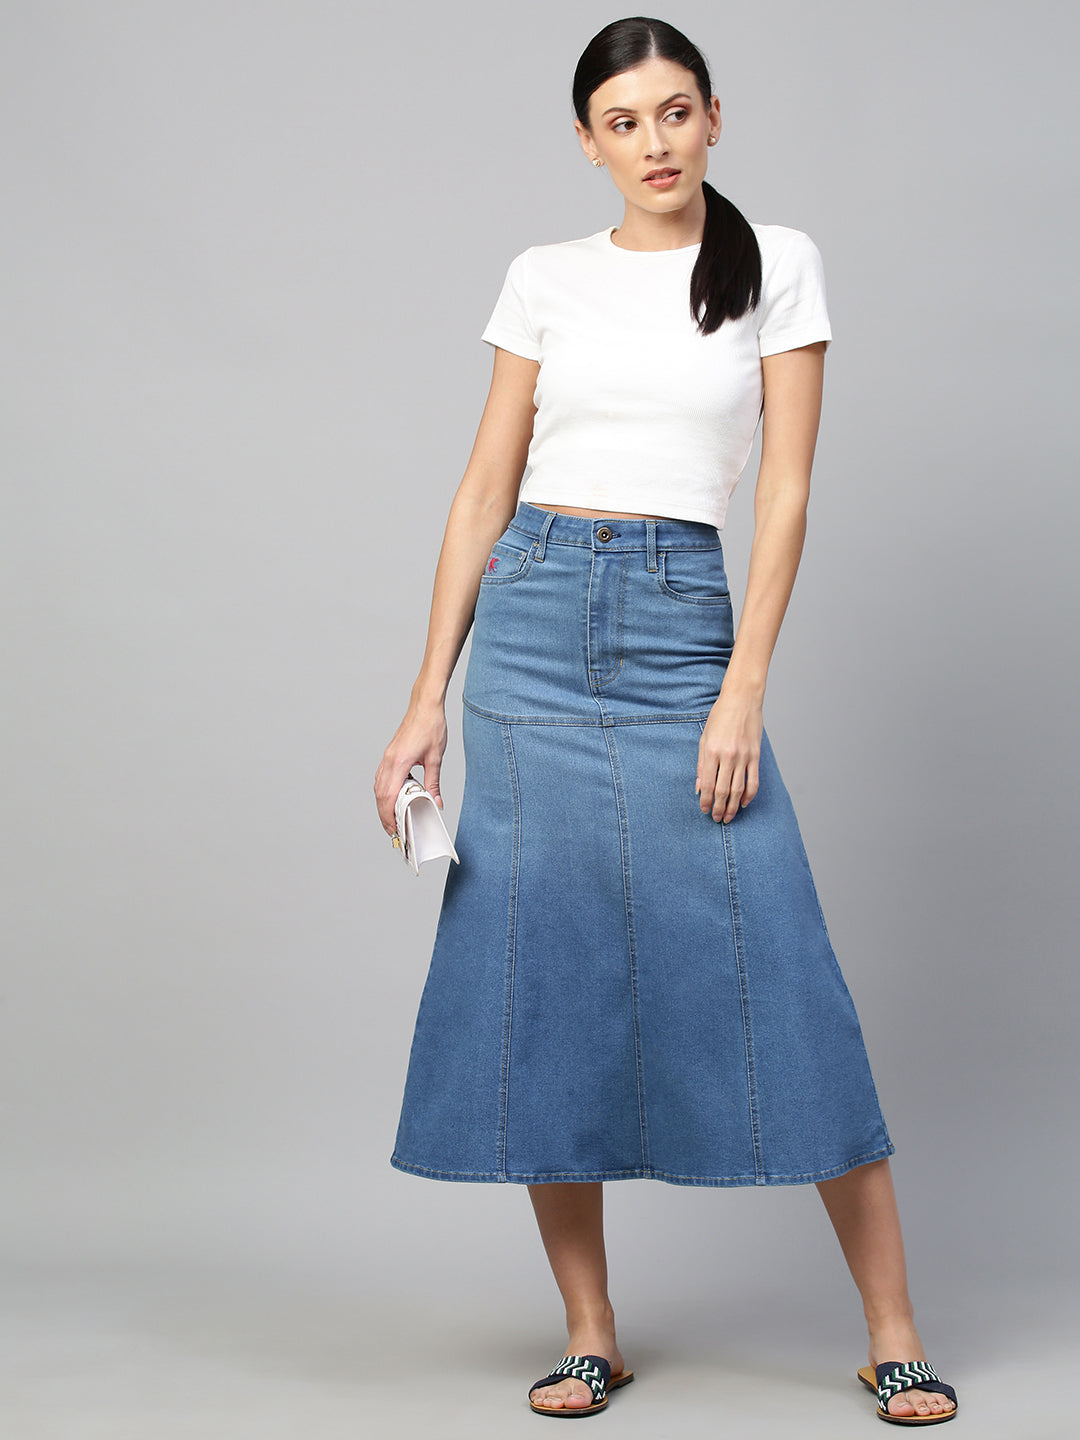 Choose from our collection of stylish denim skirts. – Chemistry